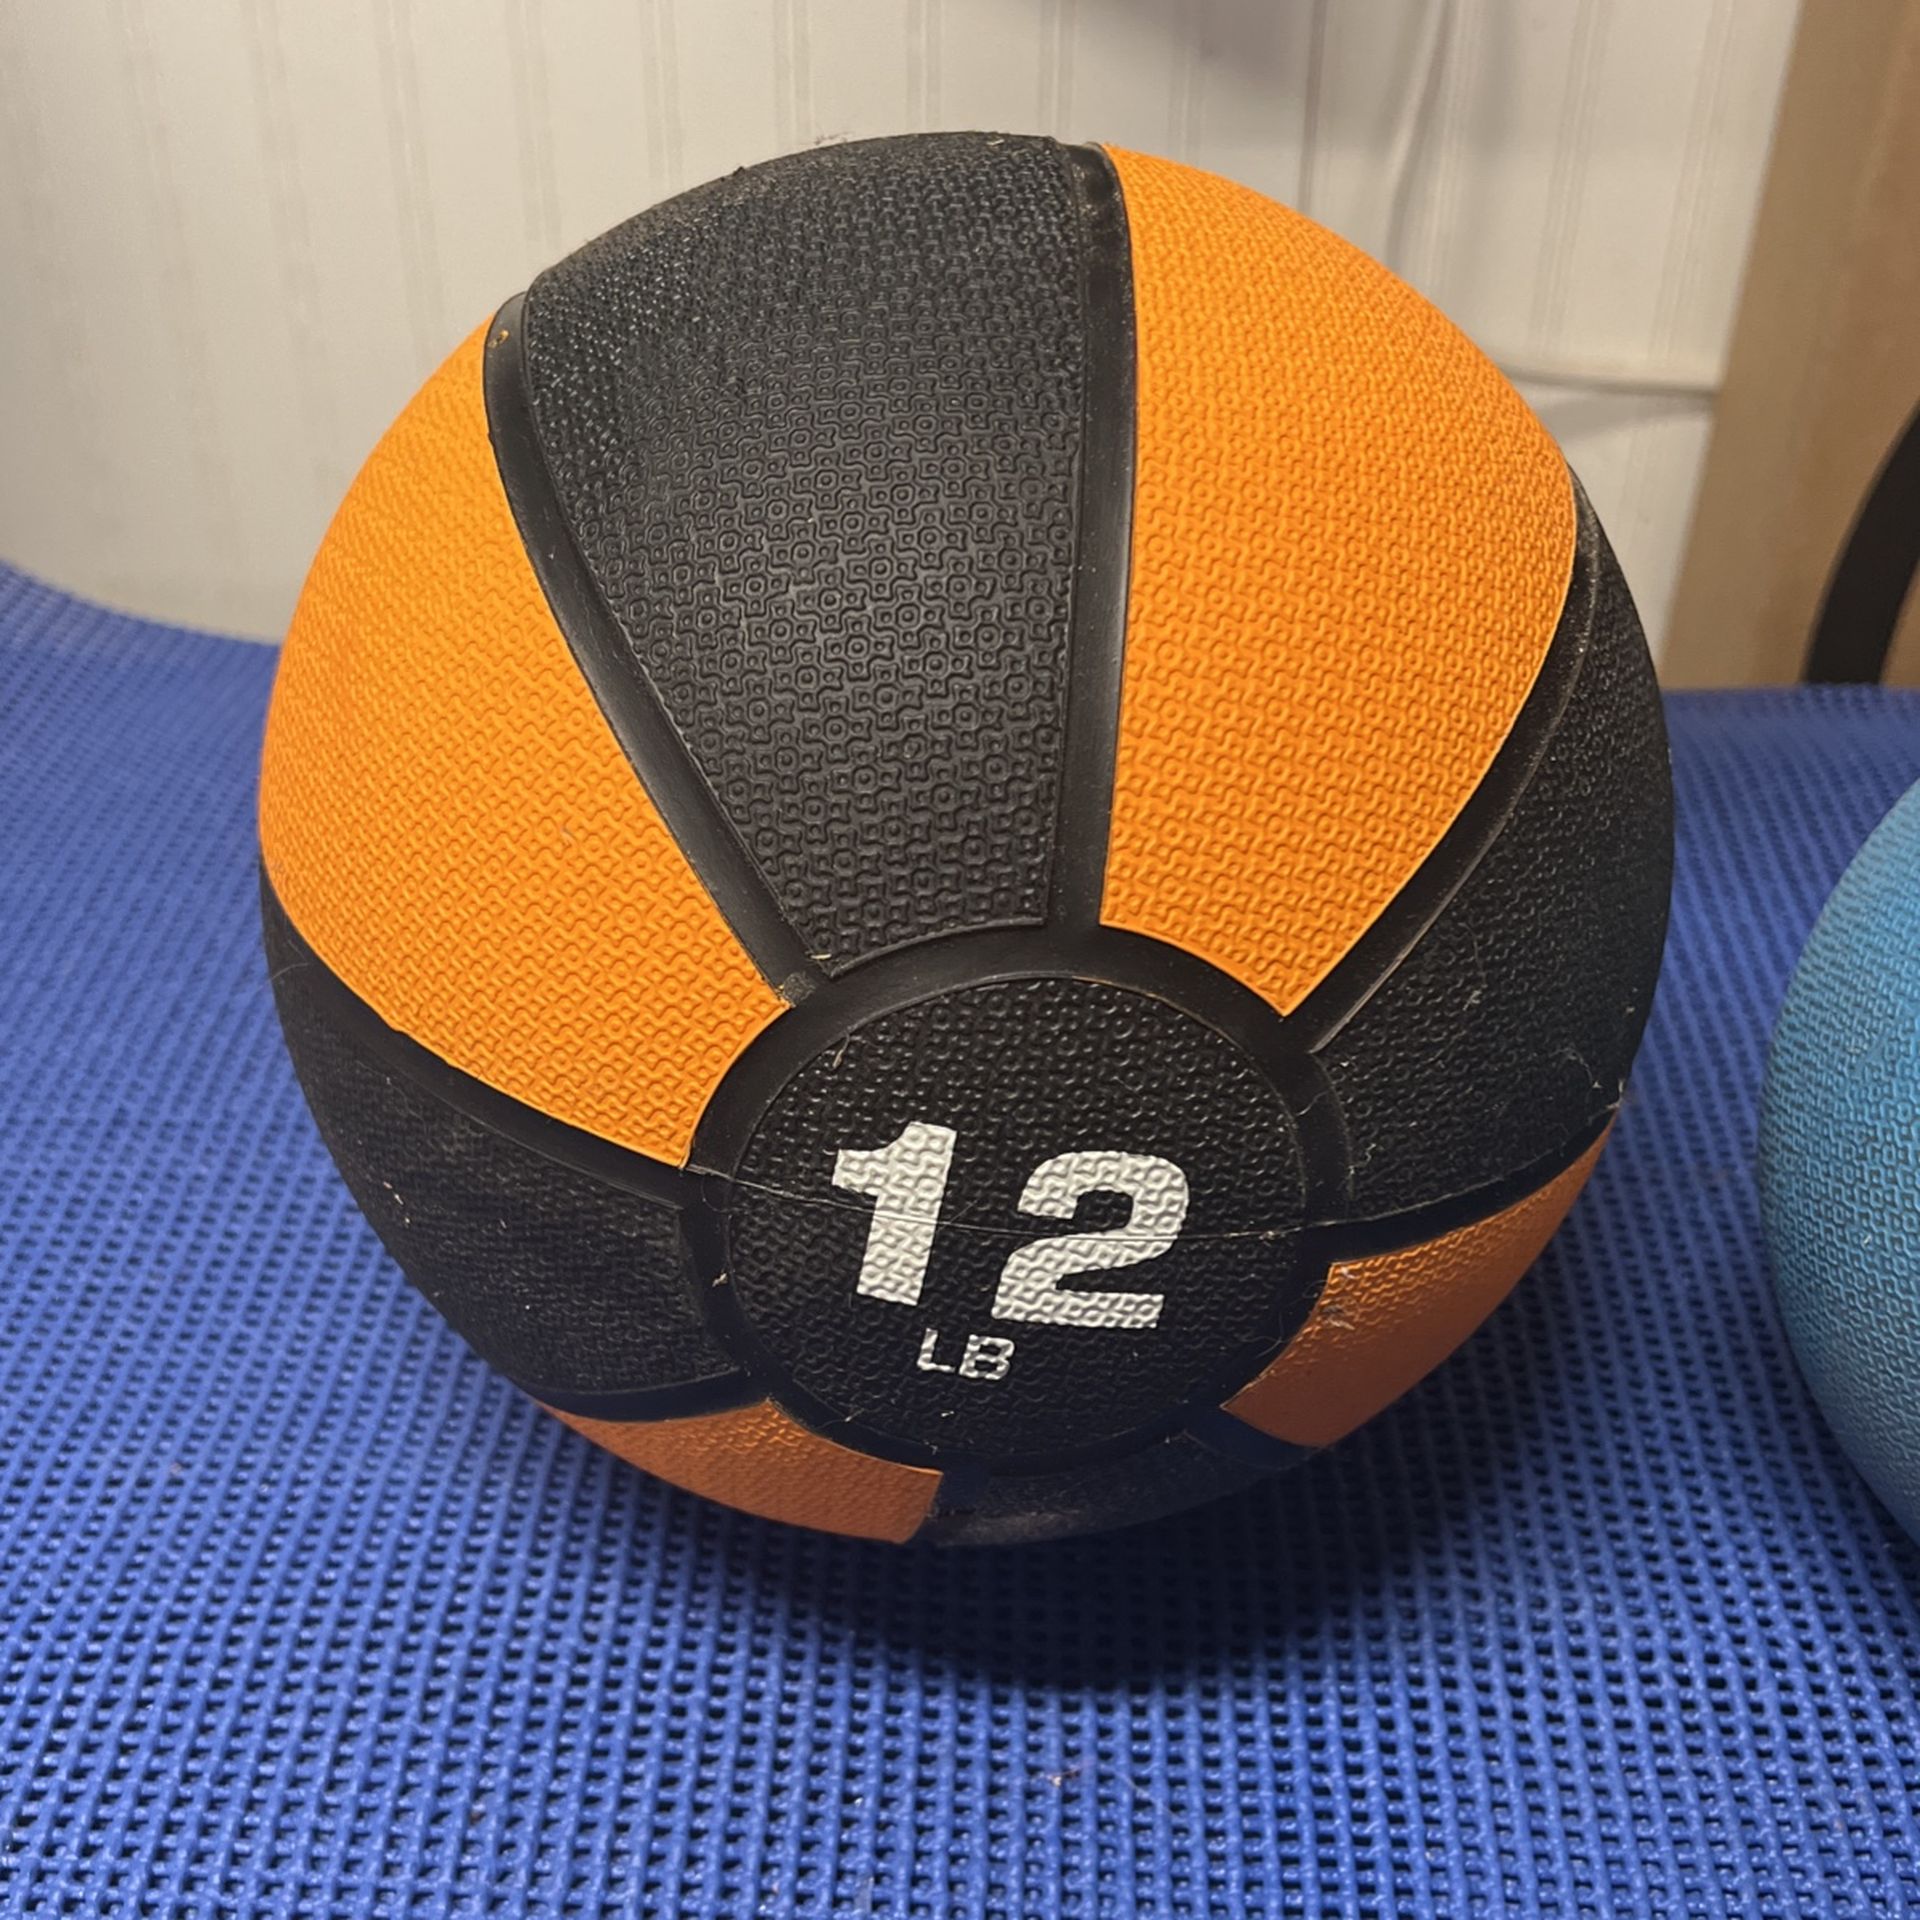 Weighted Exercise Balls